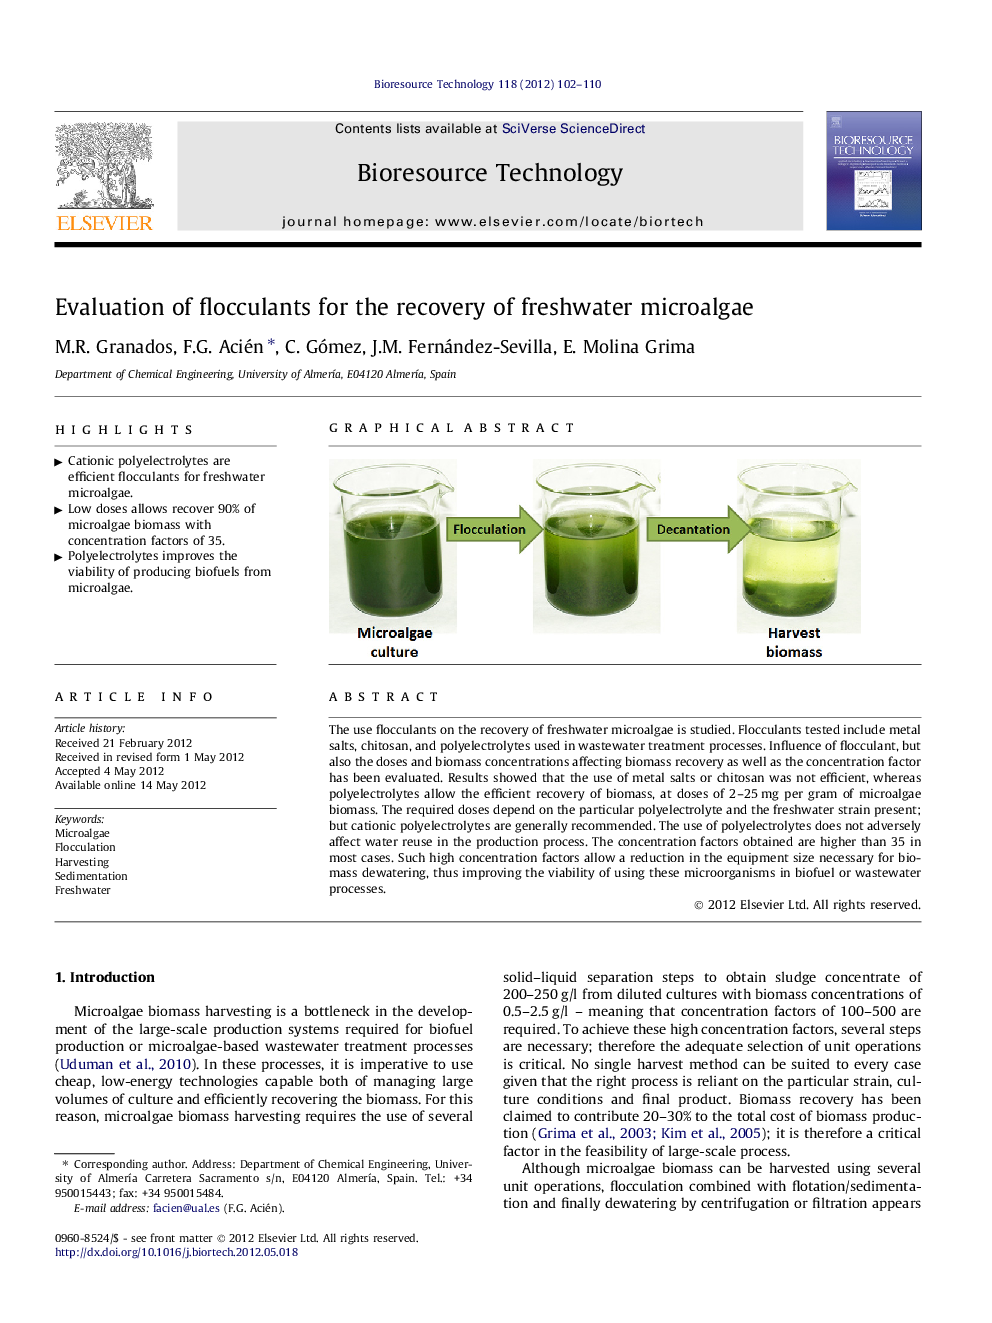 Evaluation of flocculants for the recovery of freshwater microalgae